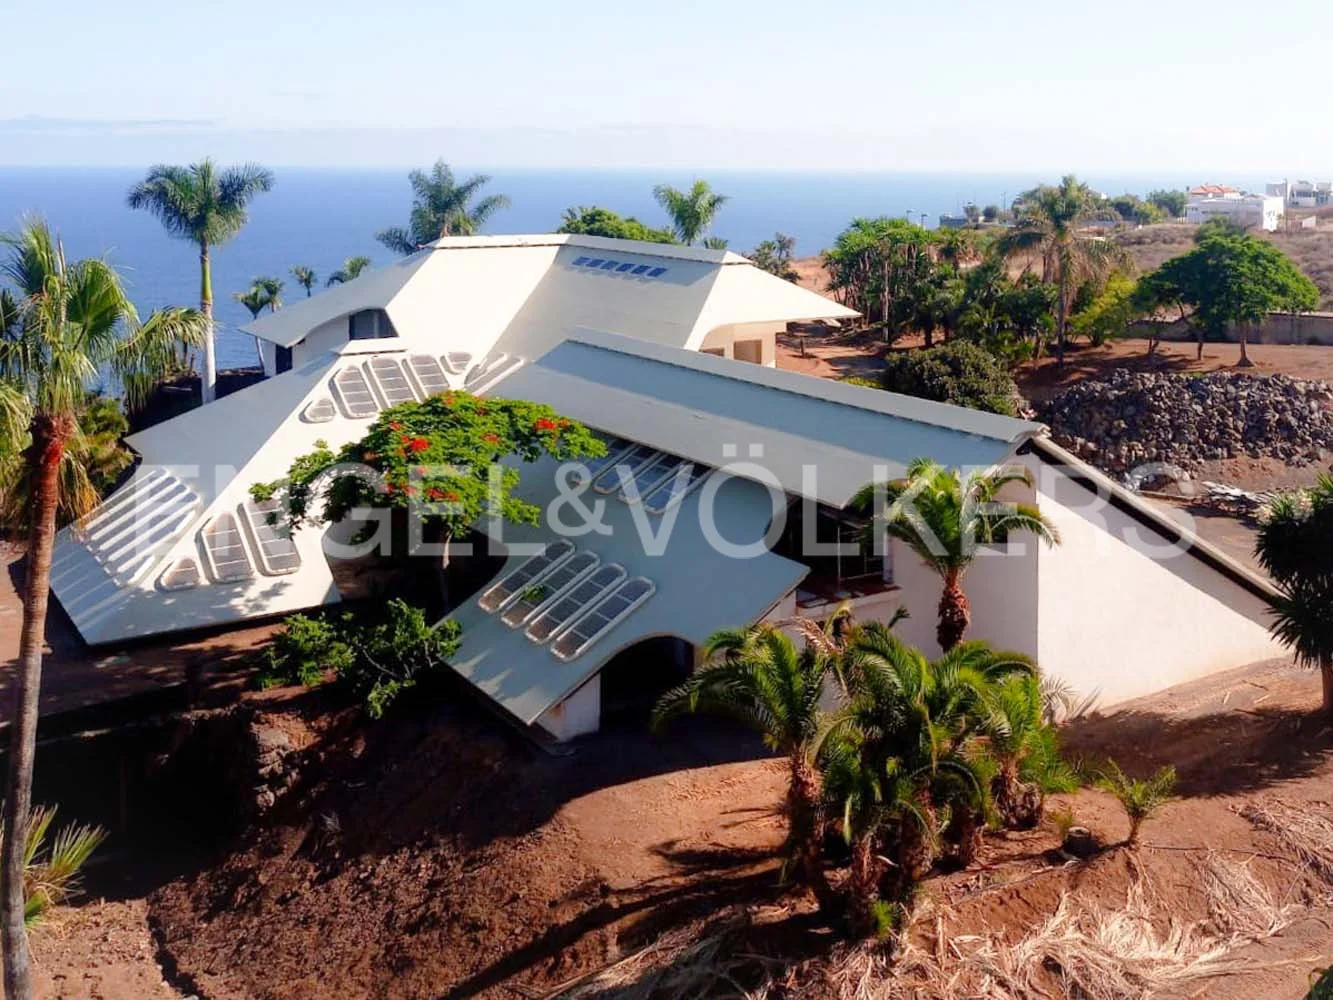 Villa in the most beautiful coastal area in the north of Tenerife